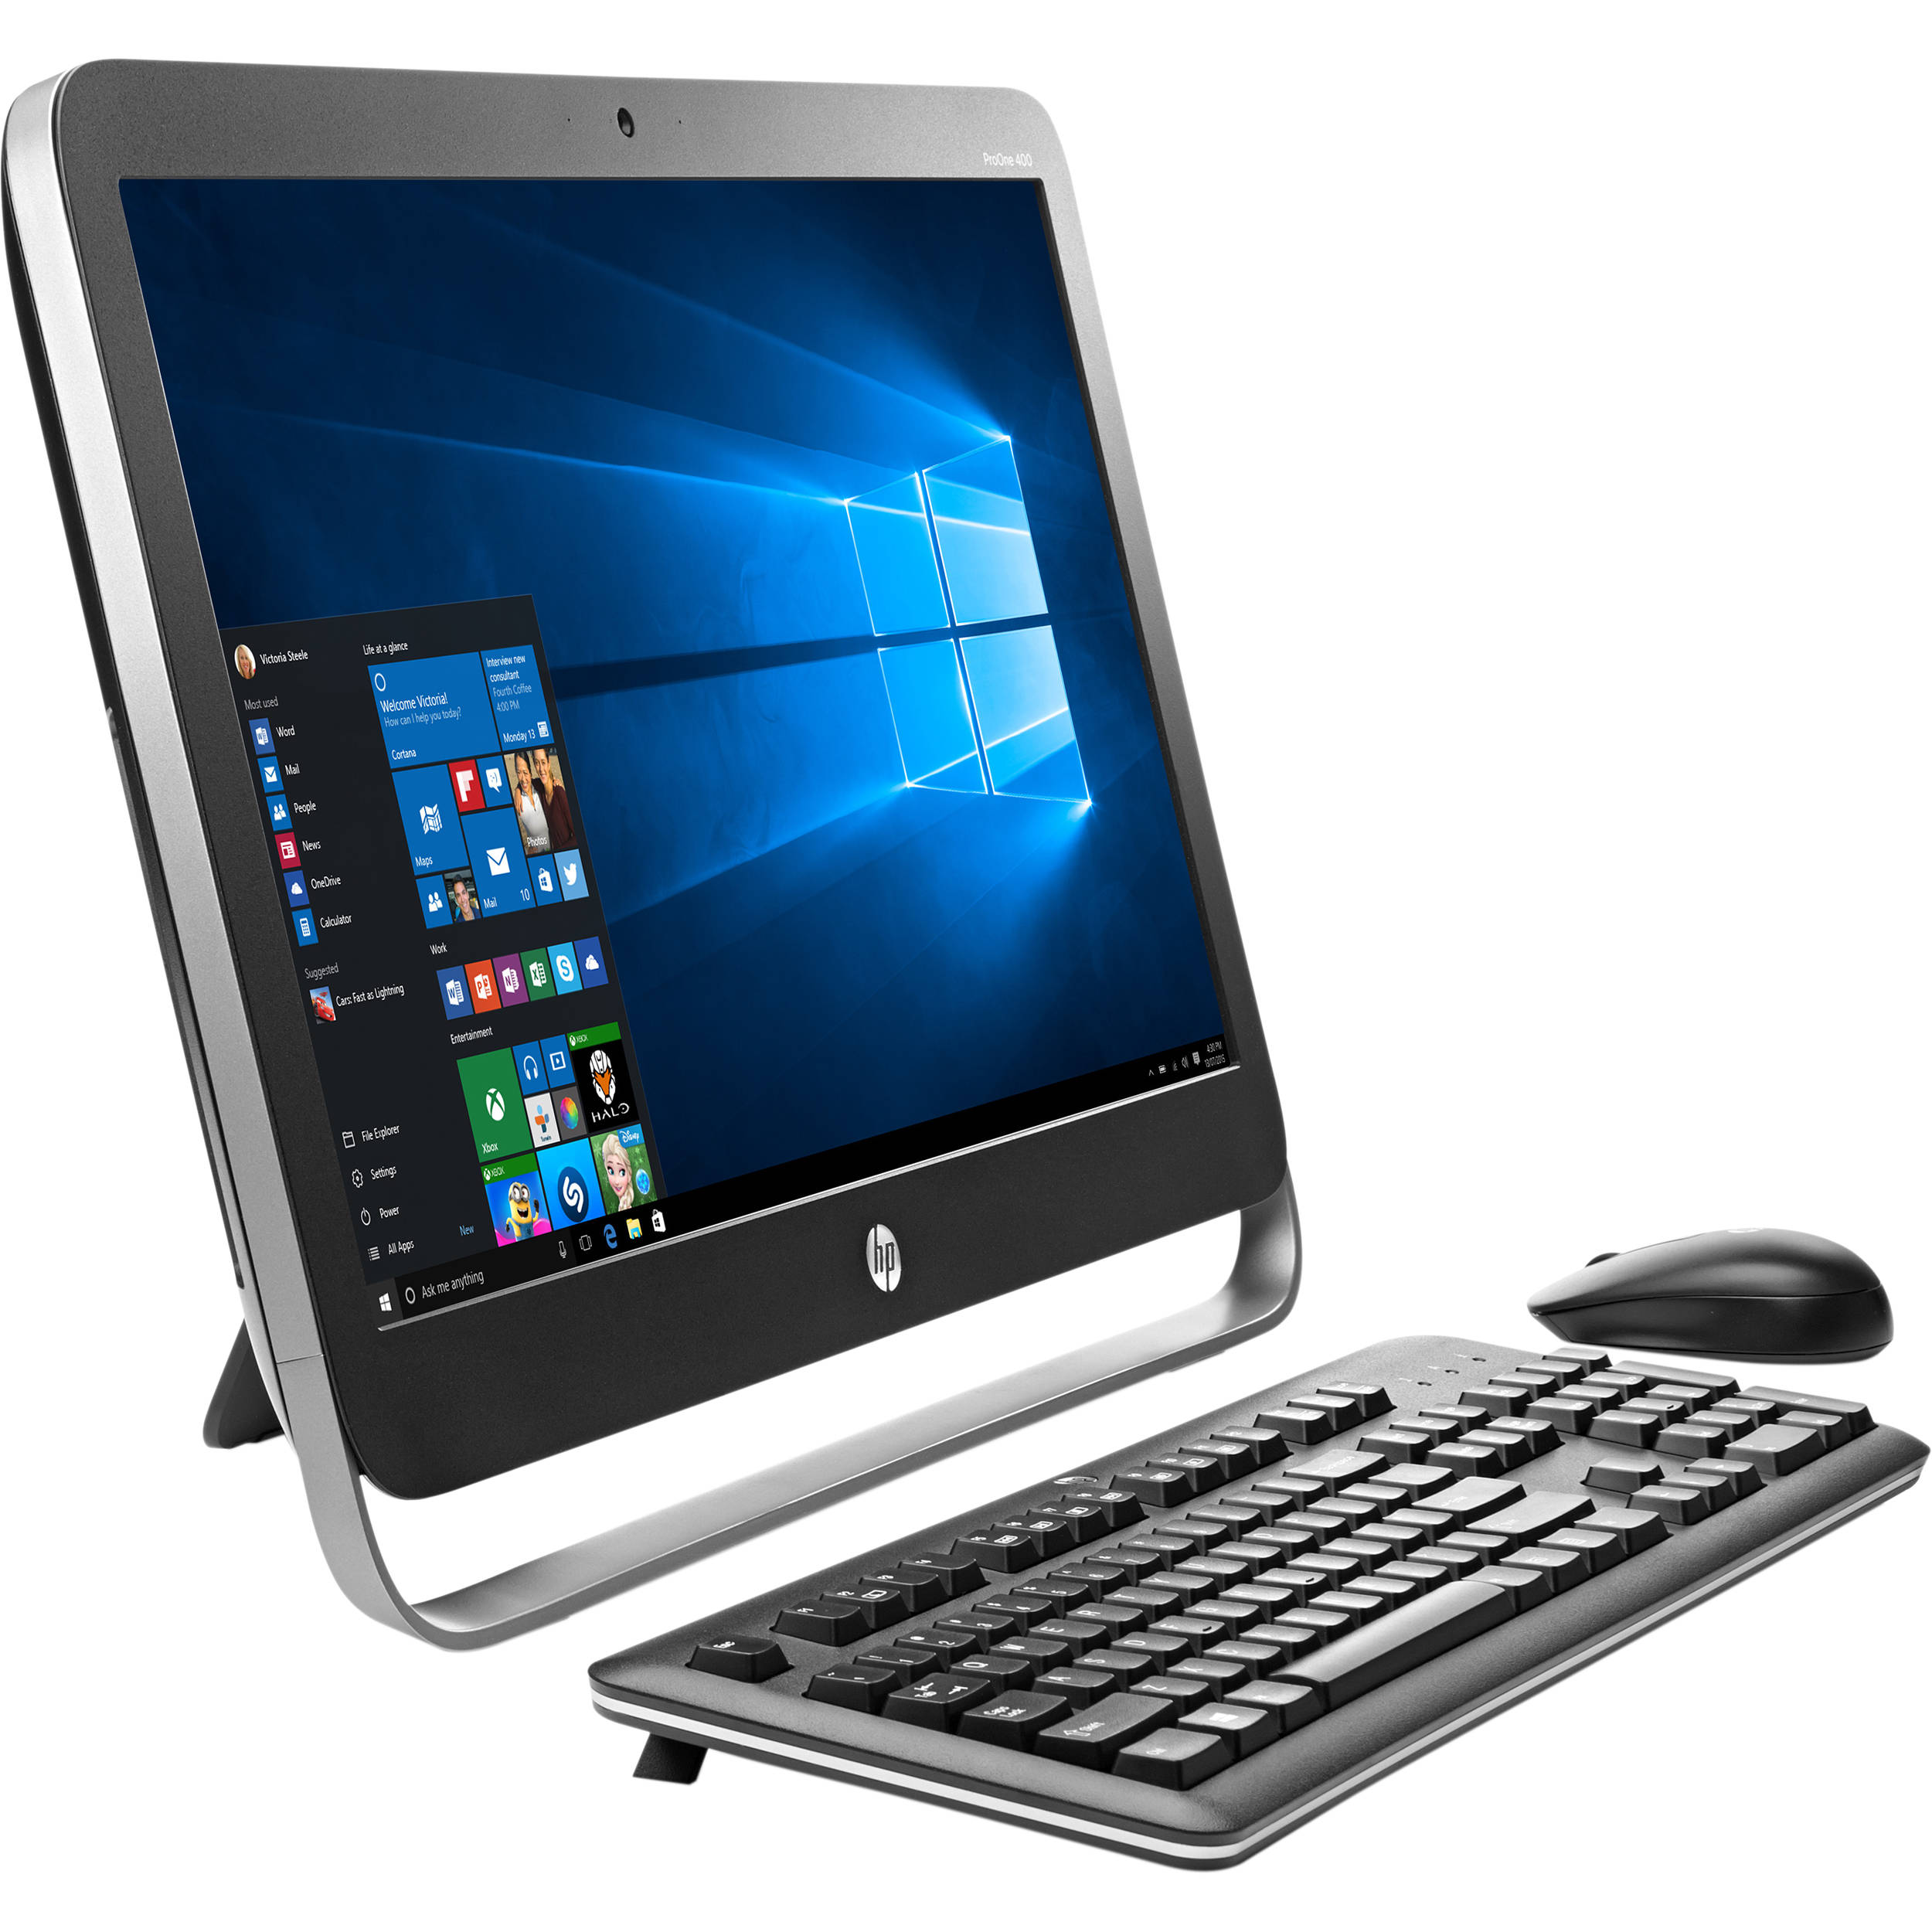 HP Aio PC - All In One PC